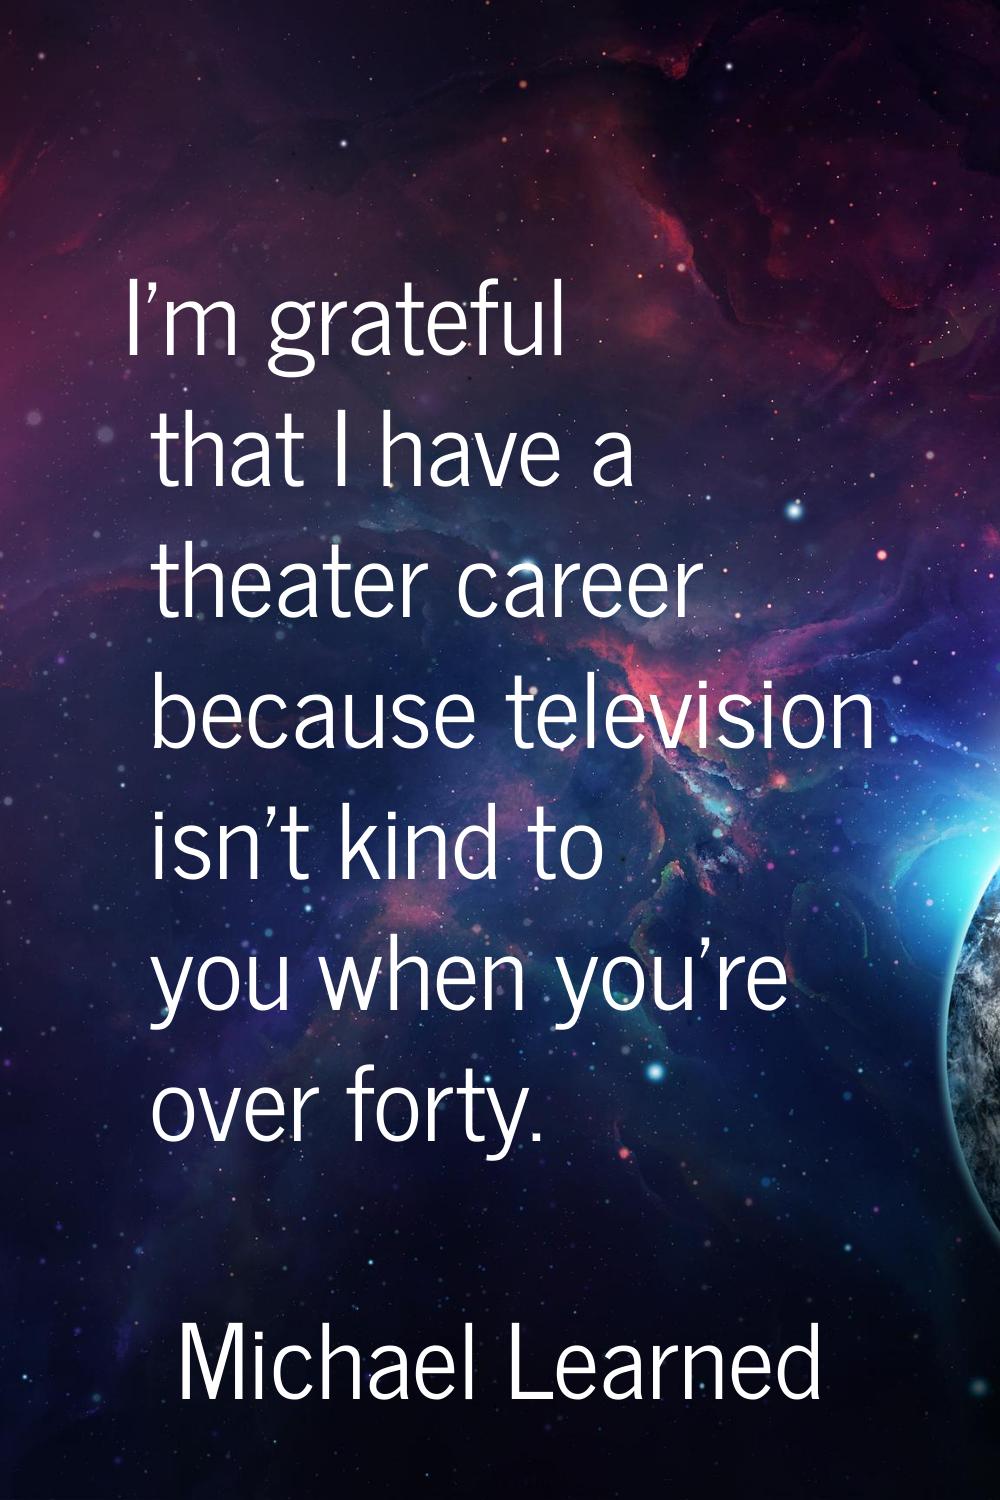 I'm grateful that I have a theater career because television isn't kind to you when you're over for